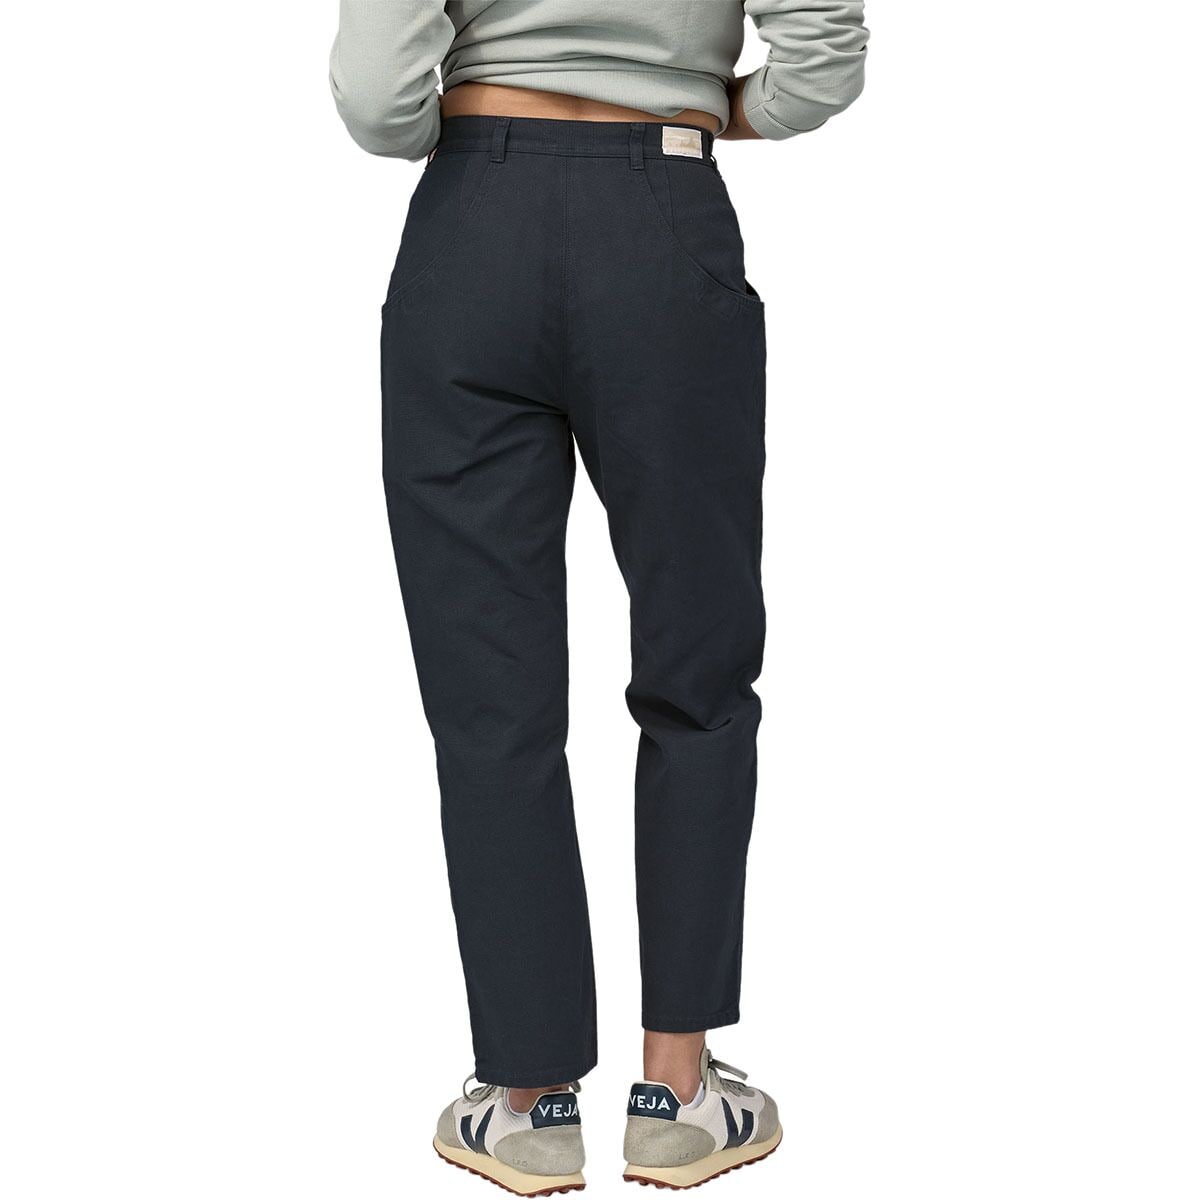 Patagonia Heritage Stand Up Pant - Women's - Clothing